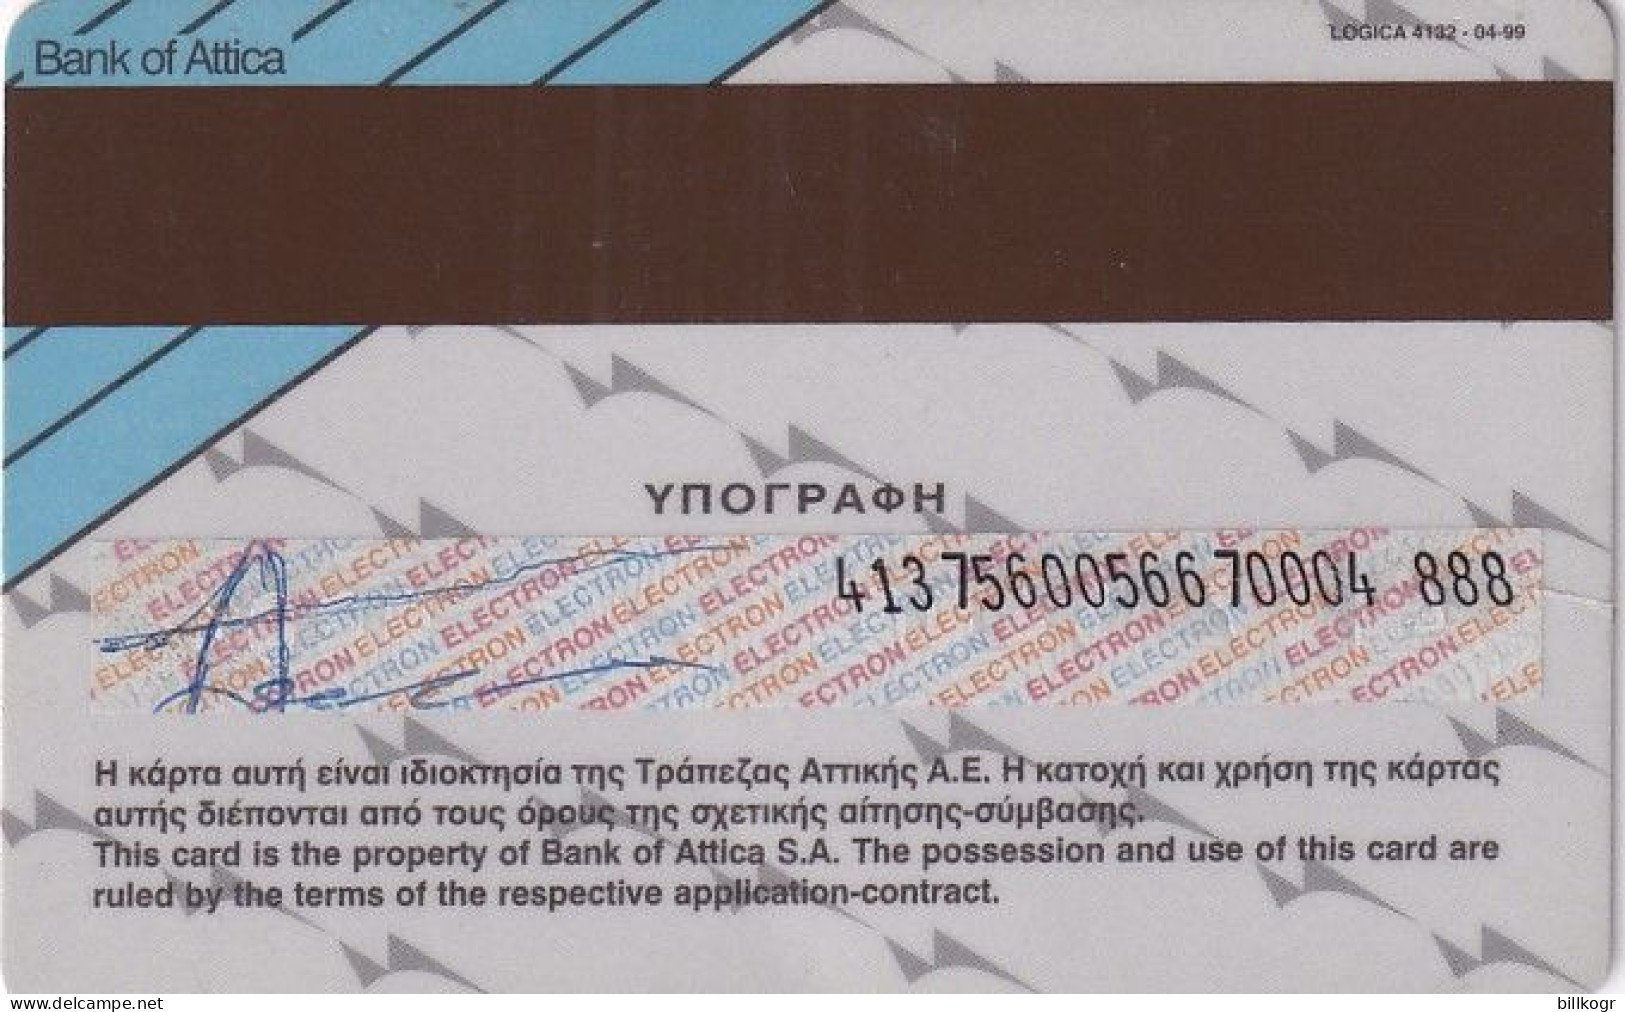 GREECE - Attica Bank Visa, 04/99, Used - Credit Cards (Exp. Date Min. 10 Years)